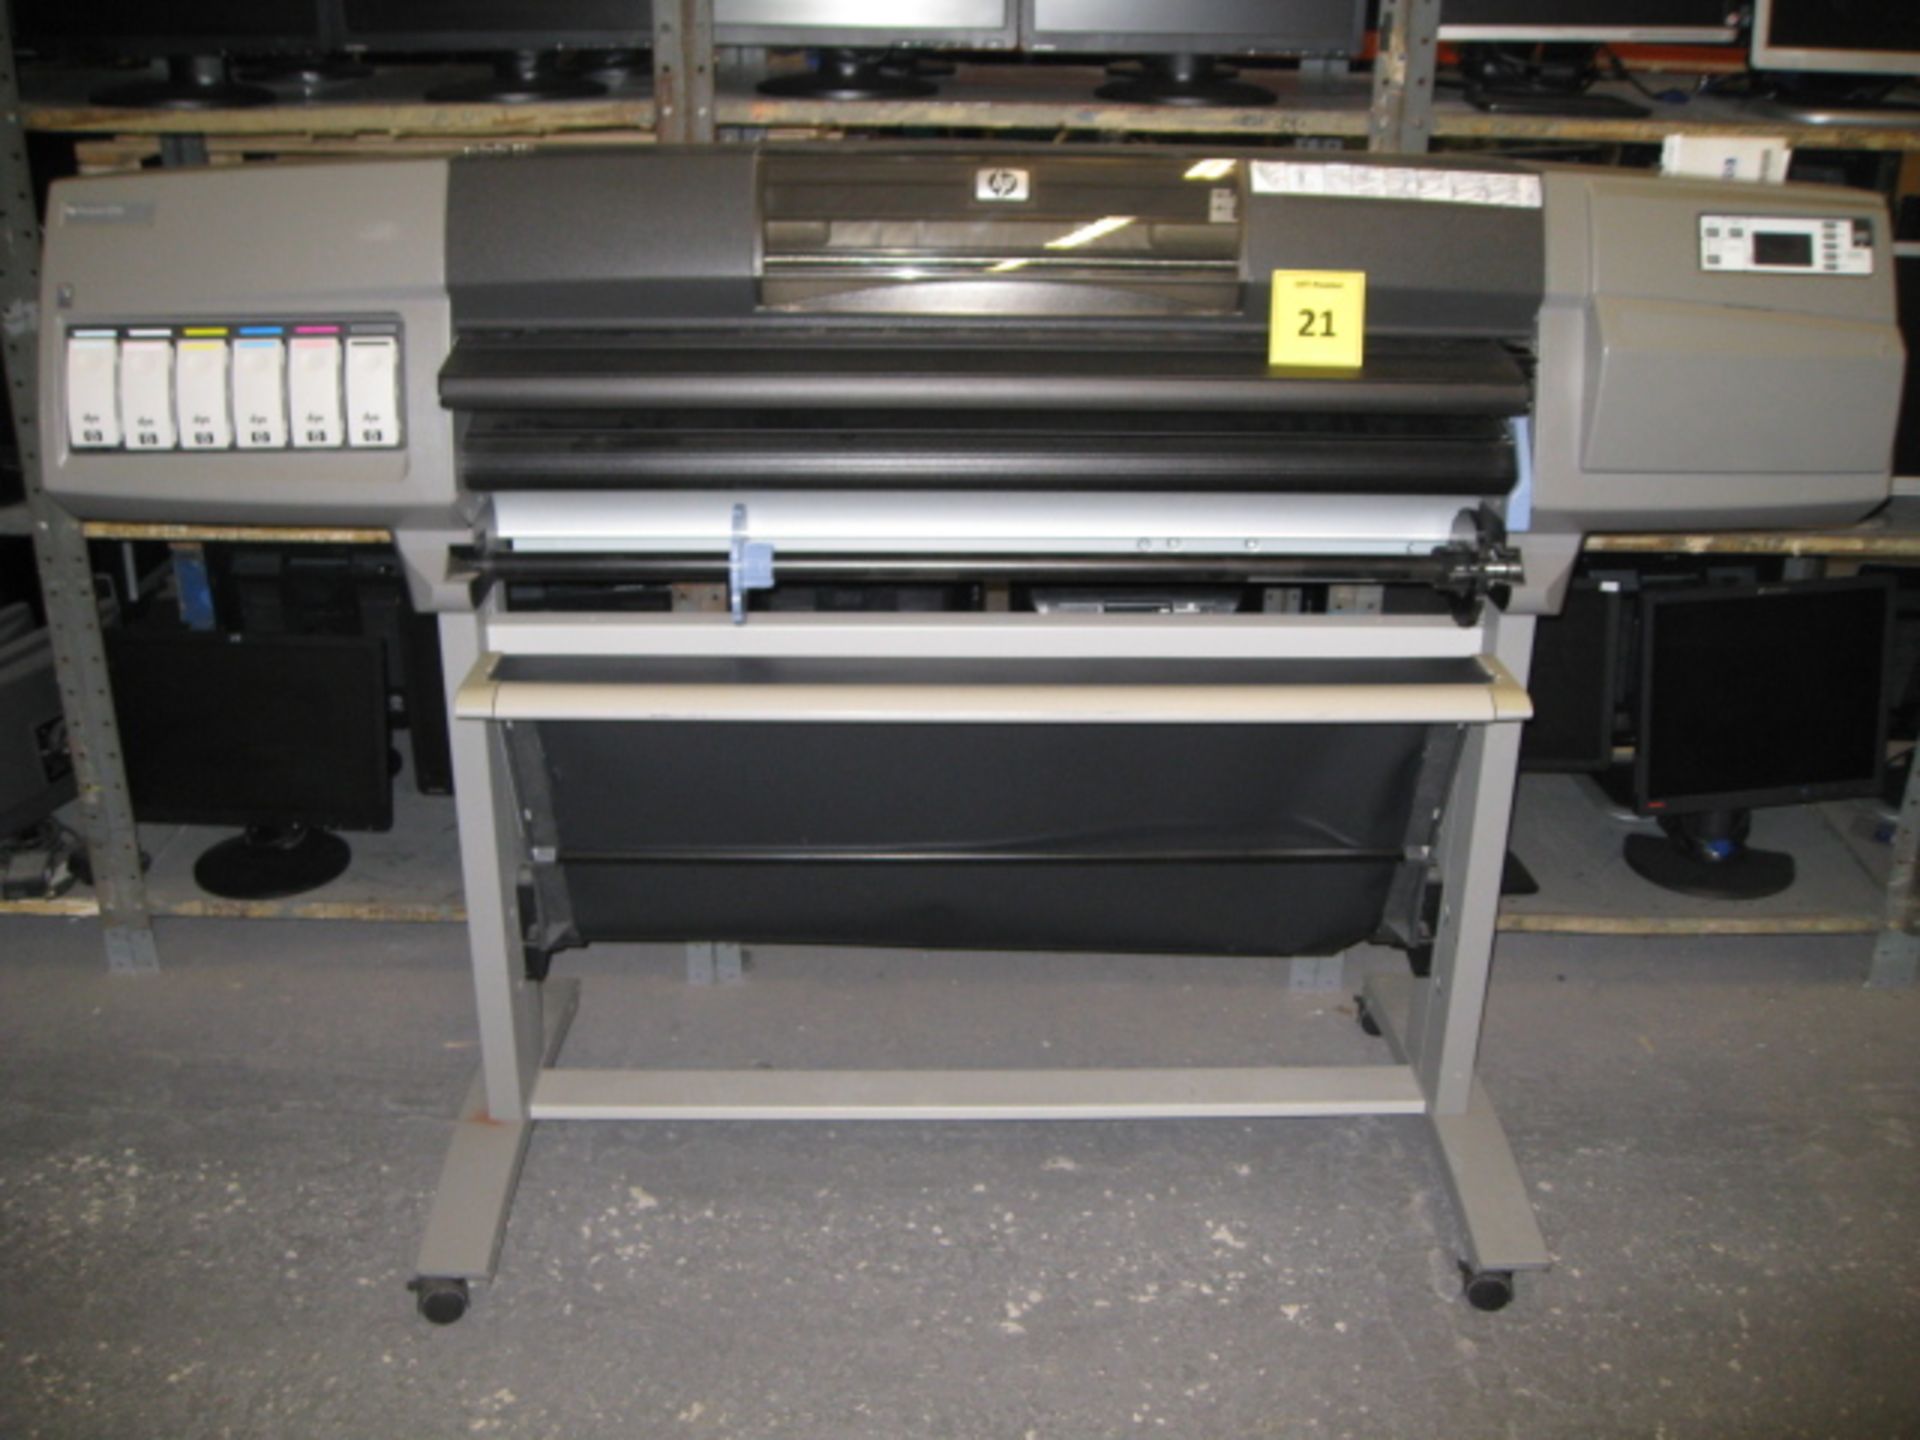 HP DESIGNJET 5500 PLOTTER. Model Q1251A. WITH TEST PRINT & USER GUIDE